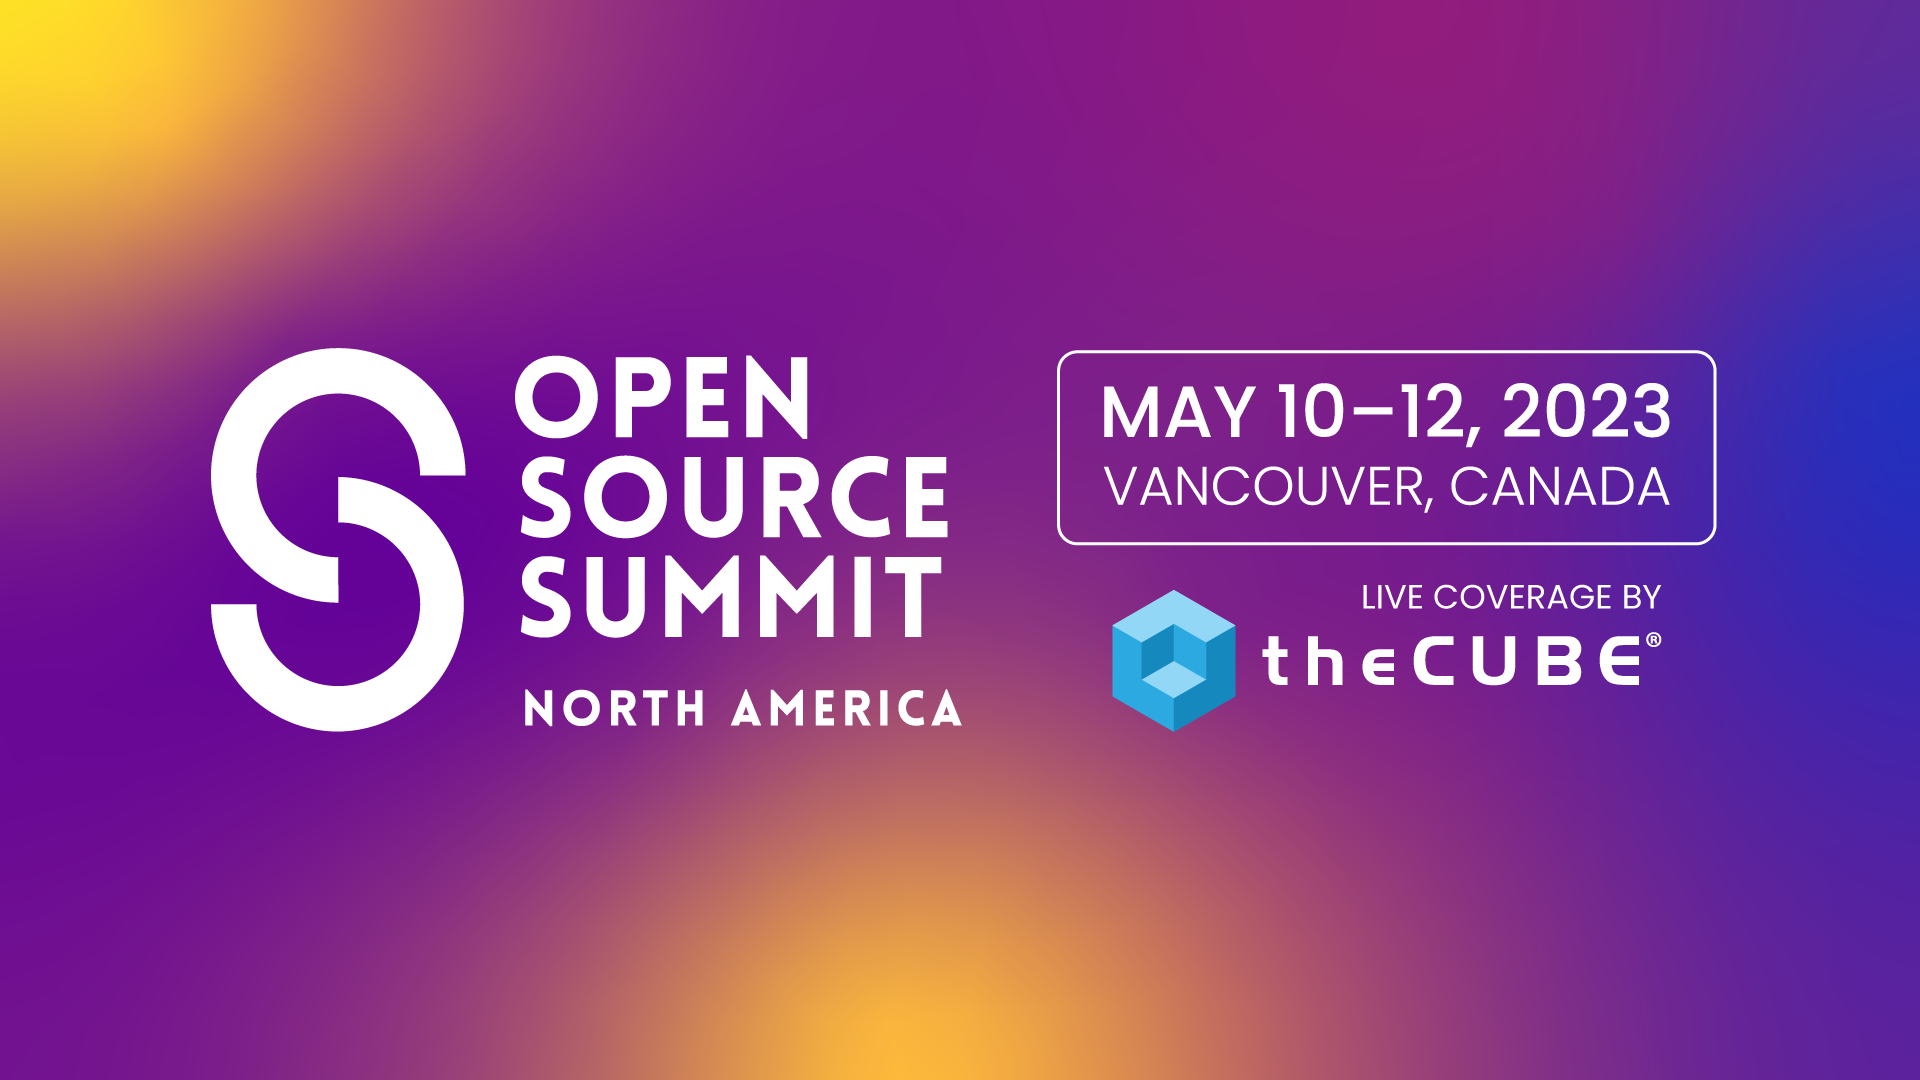 What to expect during the Open Source Summit NA event: Join theCUBE May 10-12